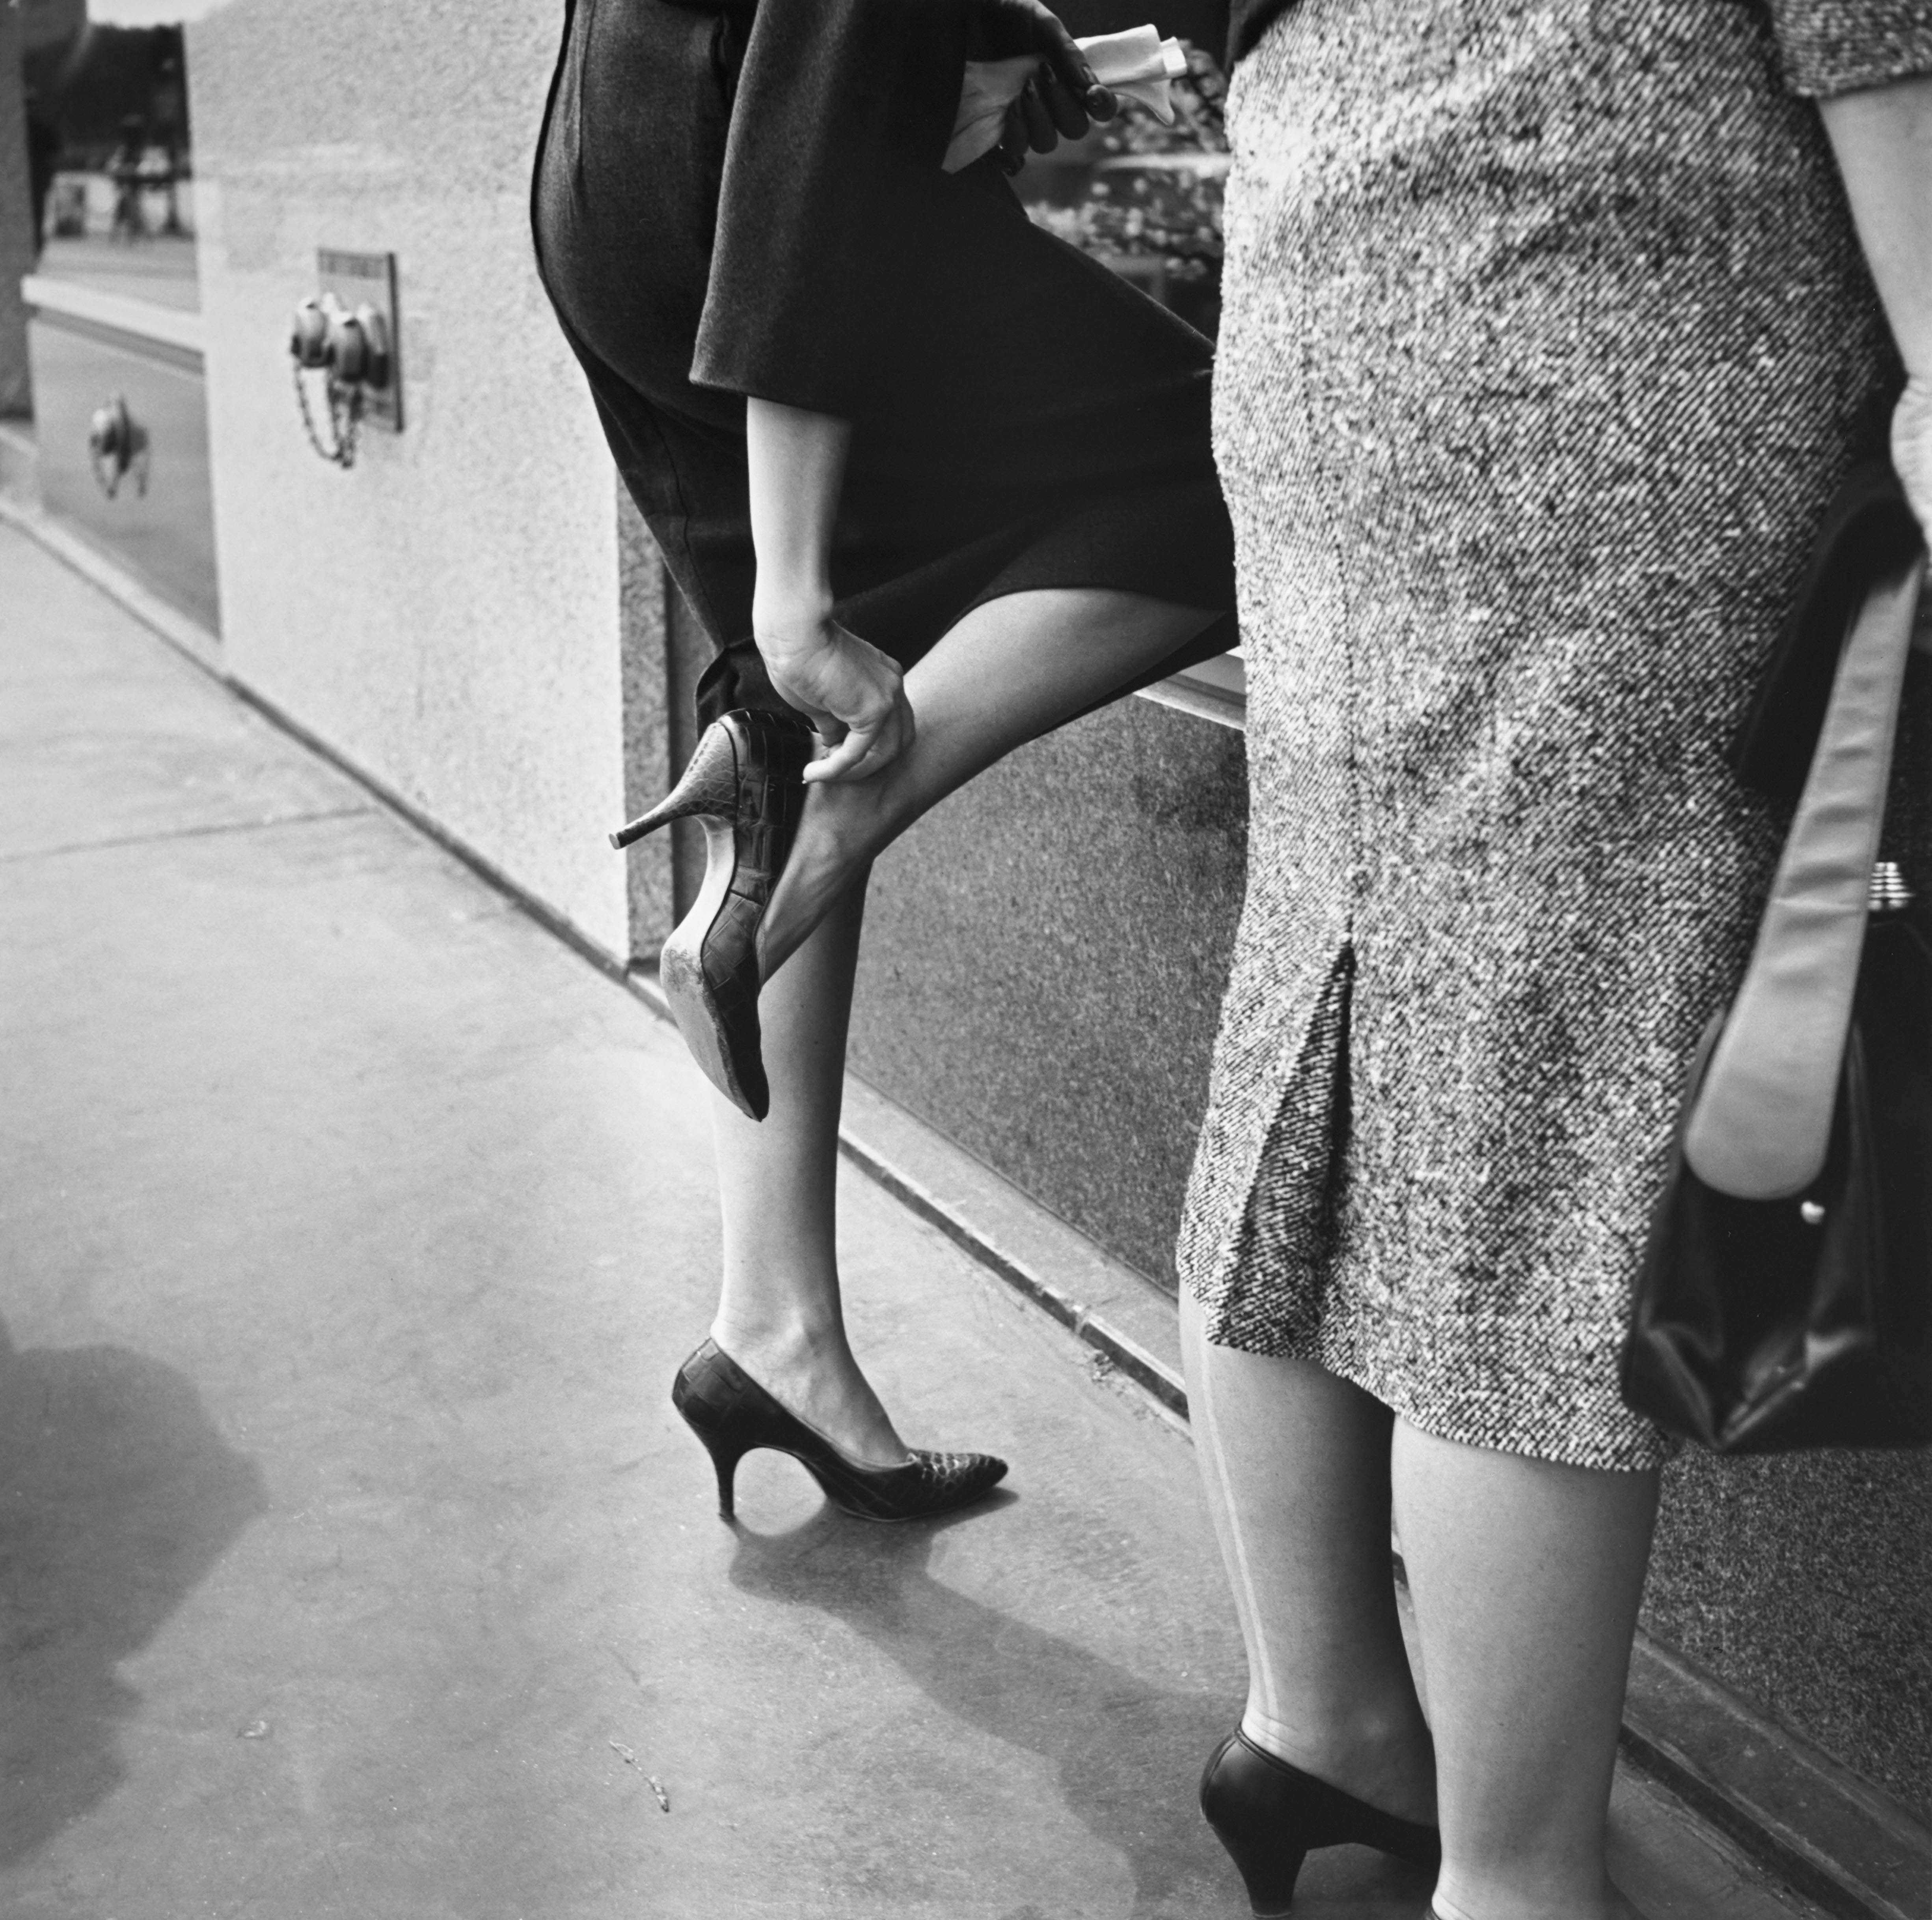 Sans lieu, septembre 1961 tirage argentique, 2020 © Estate of Vivian Maier, Courtesy of Maloof Collection and Howard Greenberg Gallery, NY